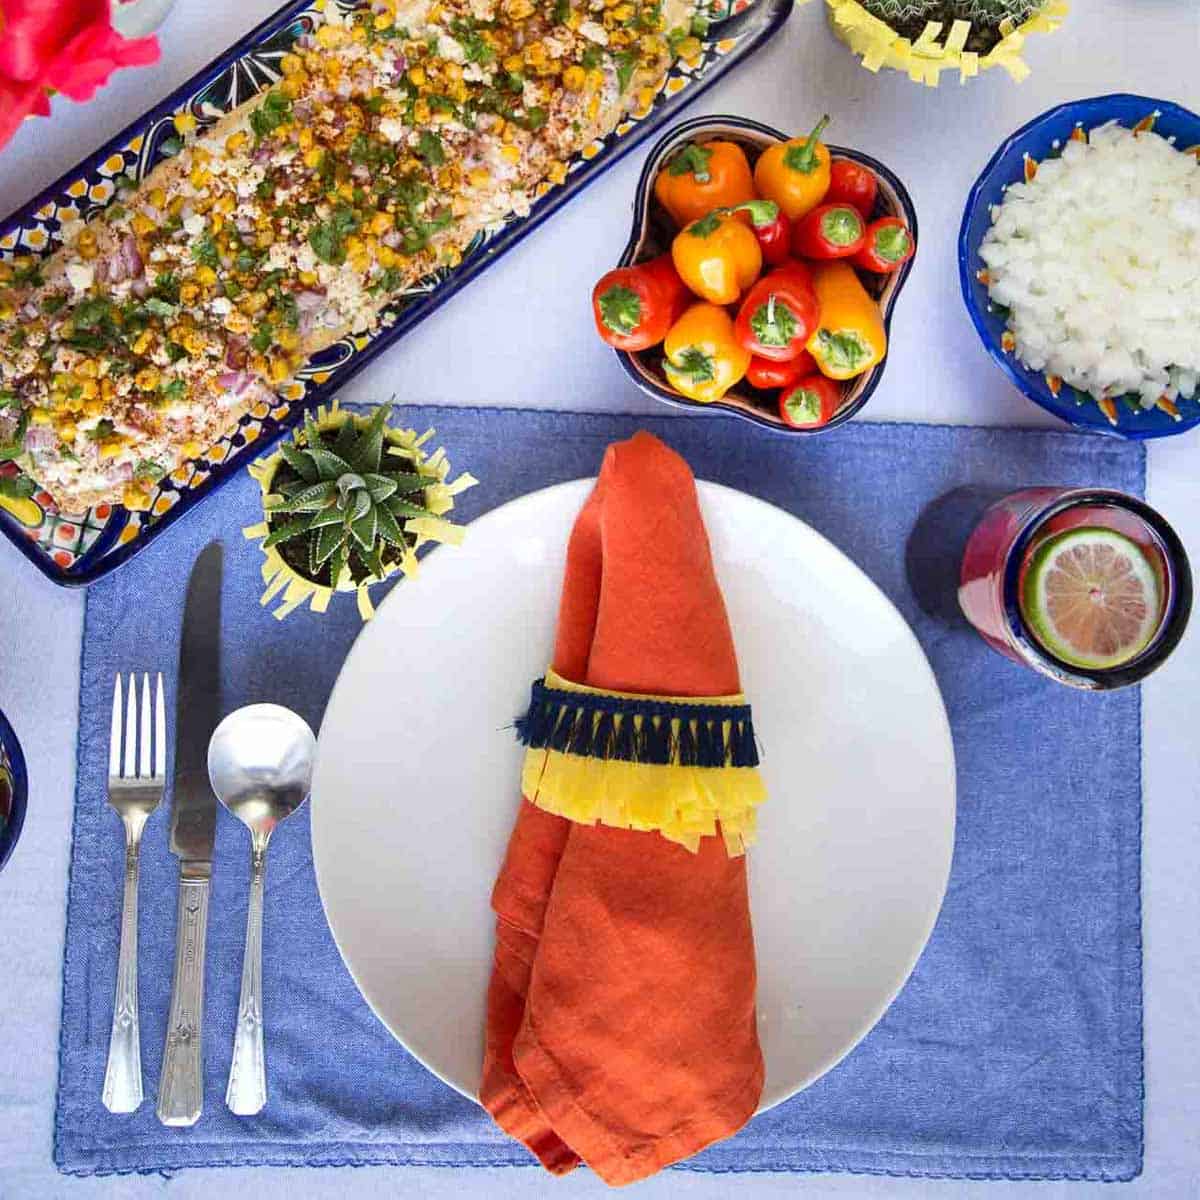 blue placemat topped with a plate and orange napkin with a colorful napkin ring.